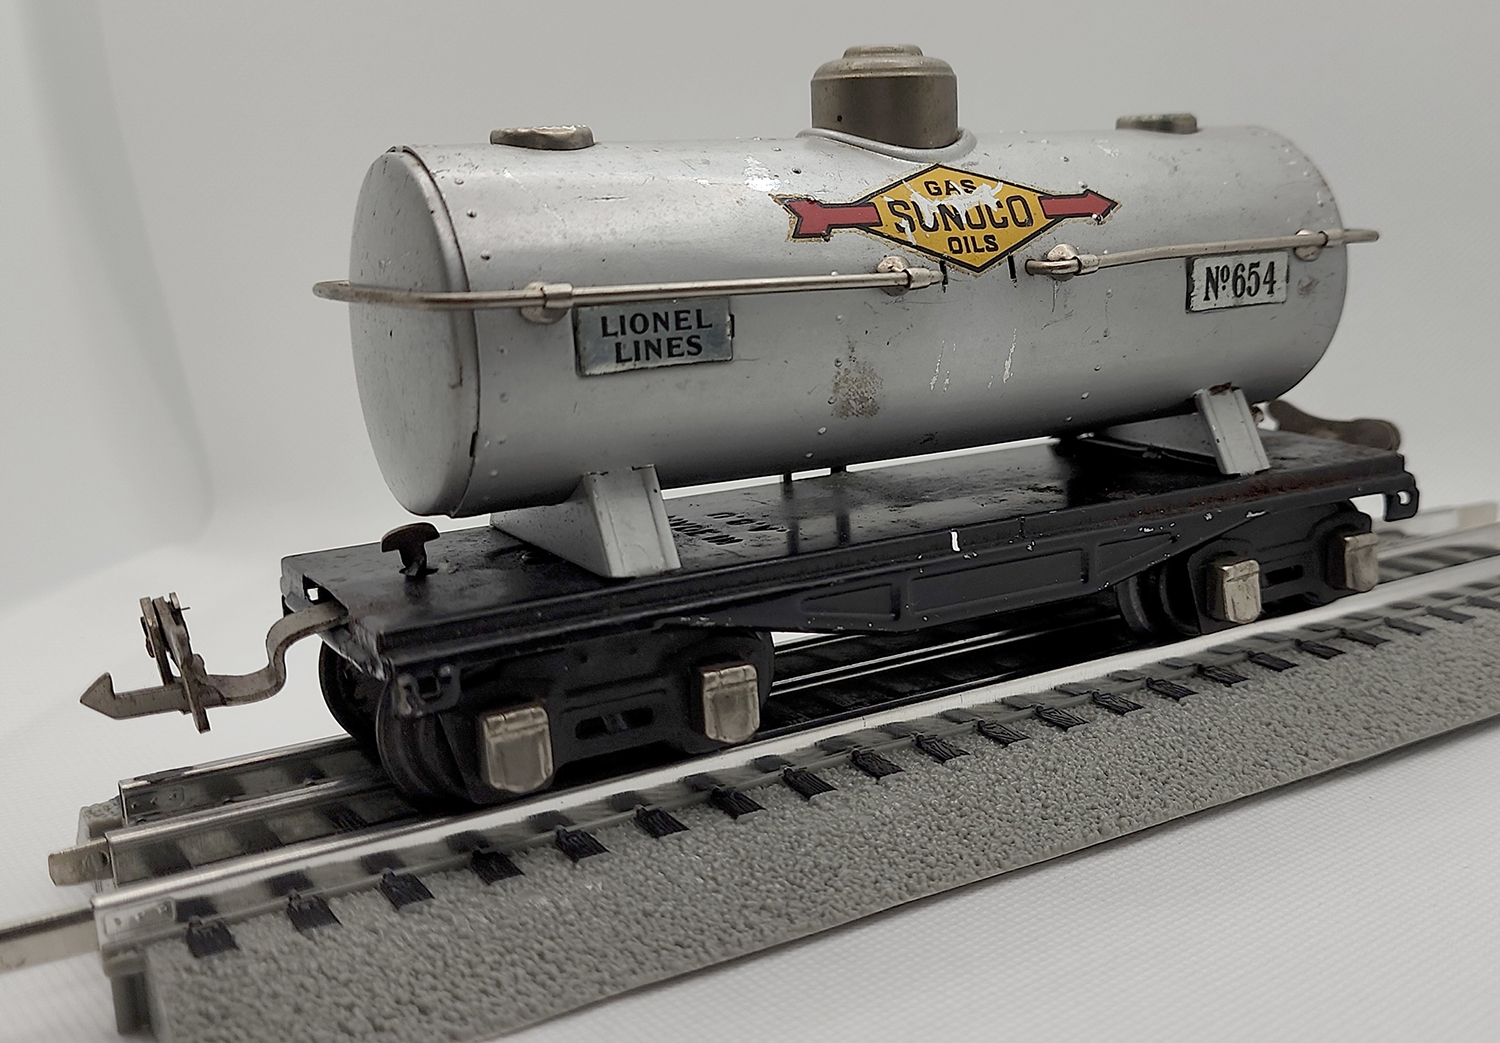 3rd view of the Lionel Sunoco Single-Dome #654 Tankcar in my O-scale Collection